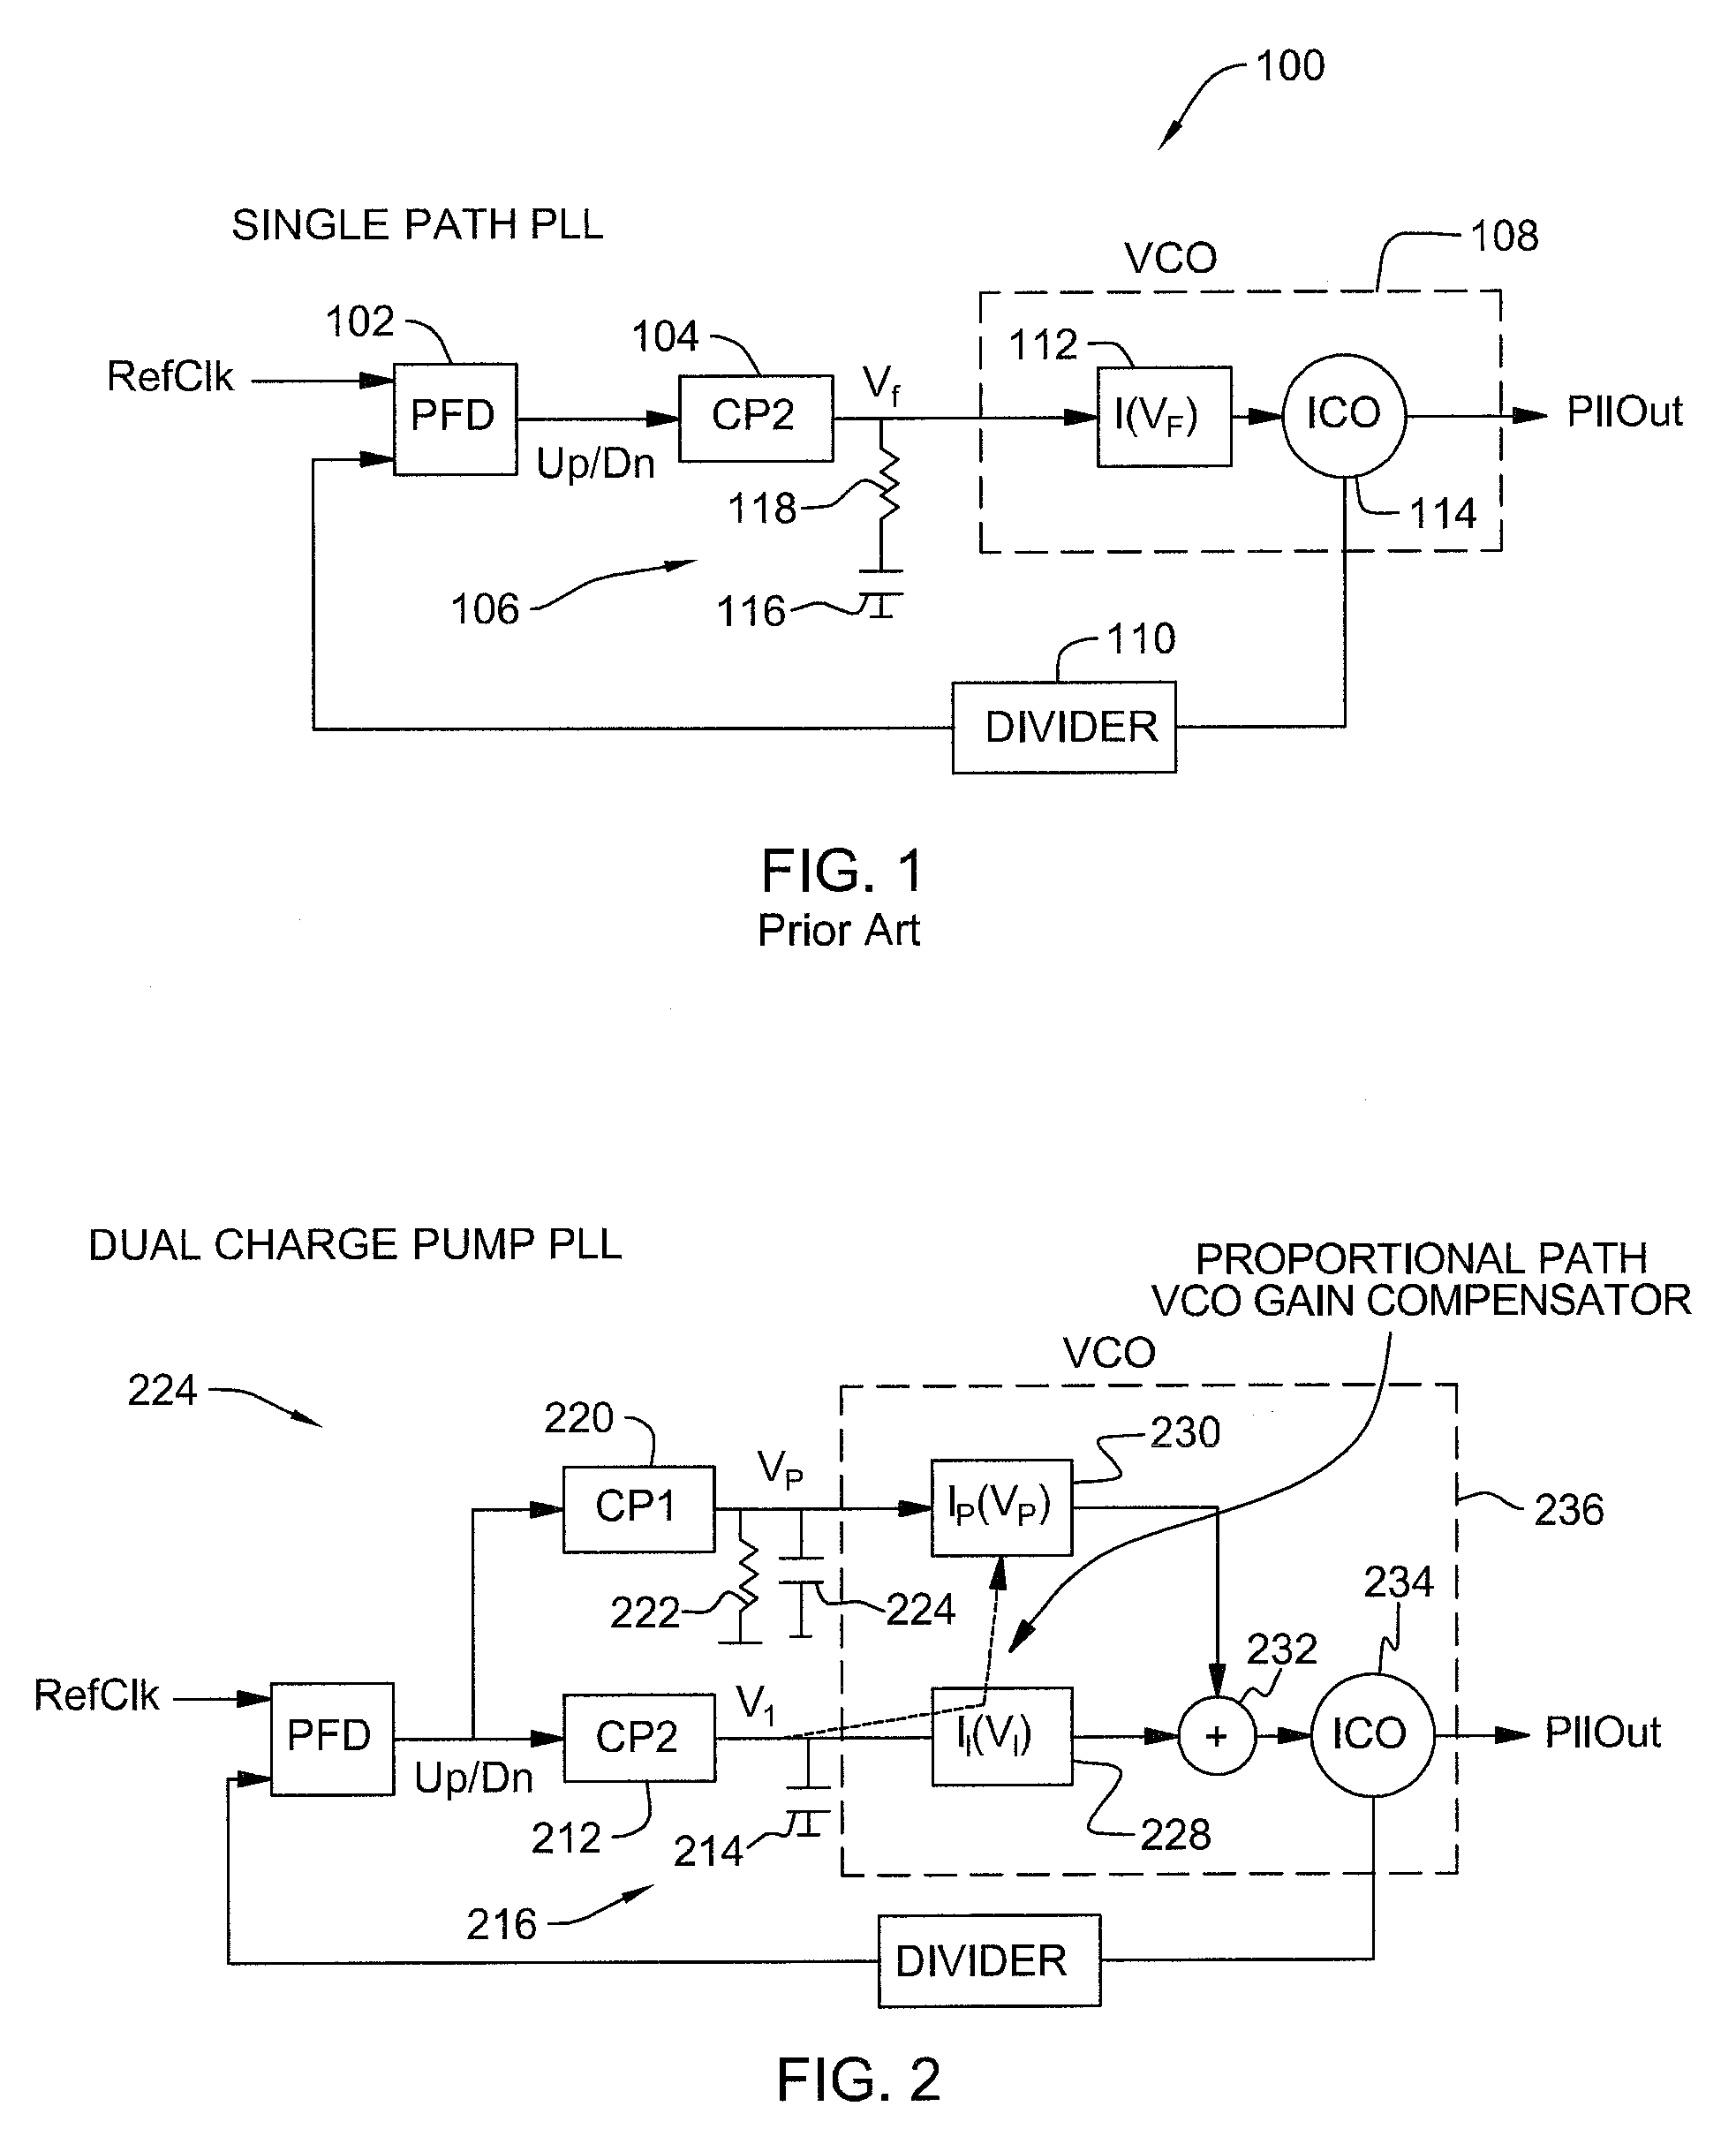 Architecture for maintaining constant voltage-controlled oscillator gain